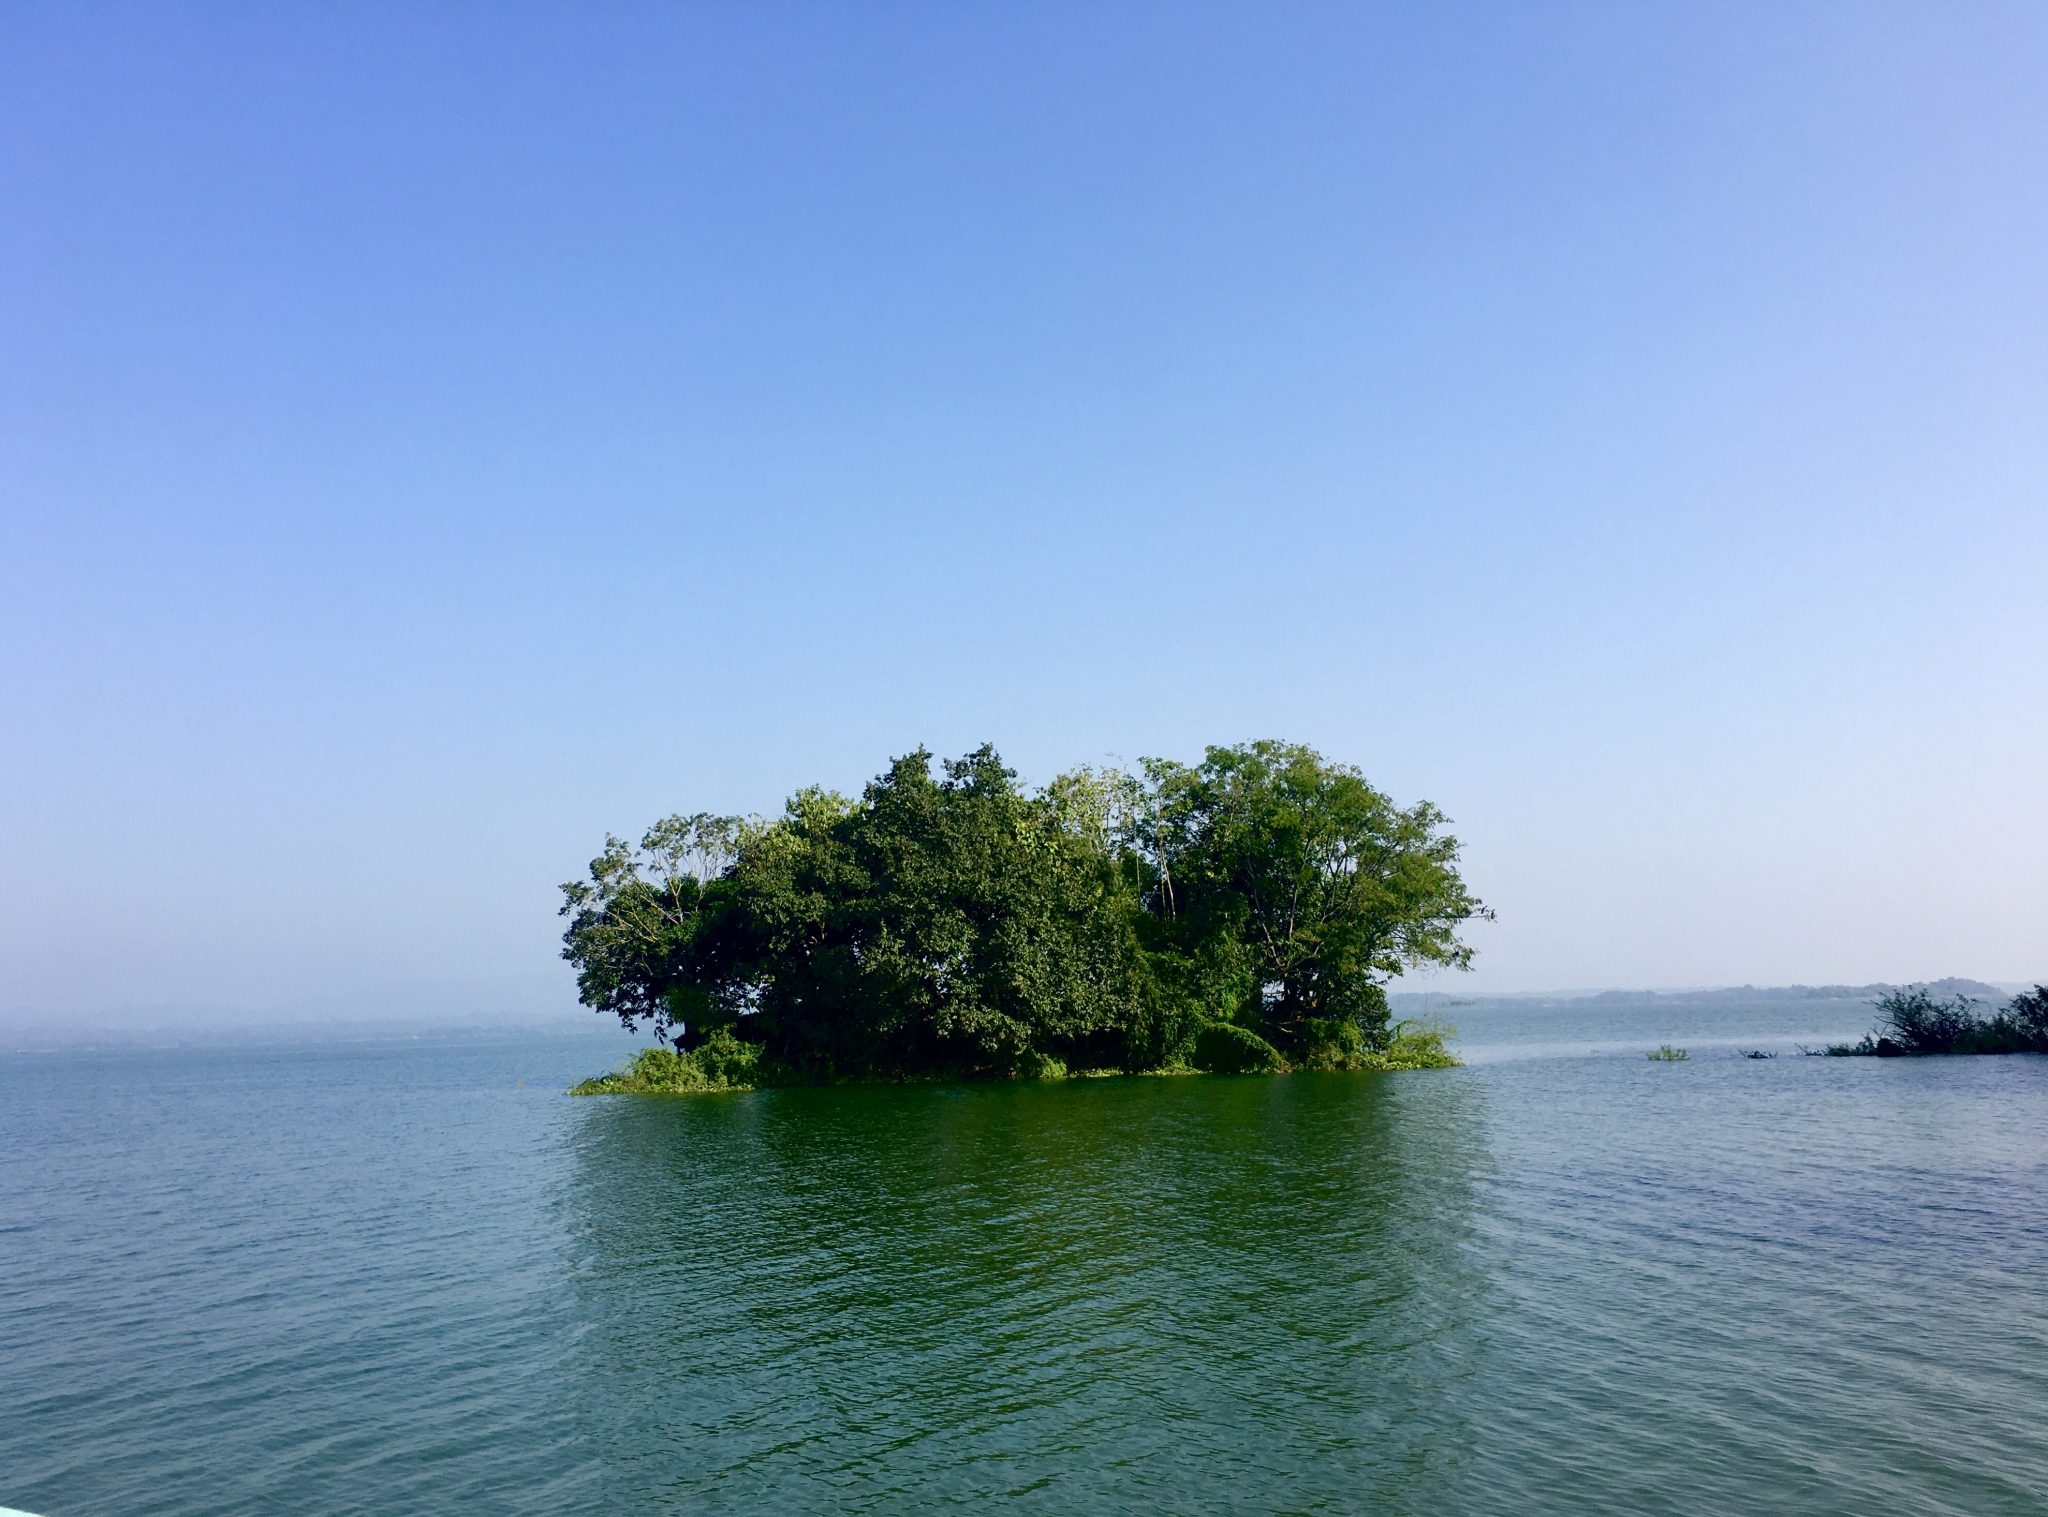 So nice view! Trees are on the water at Kaptai lack